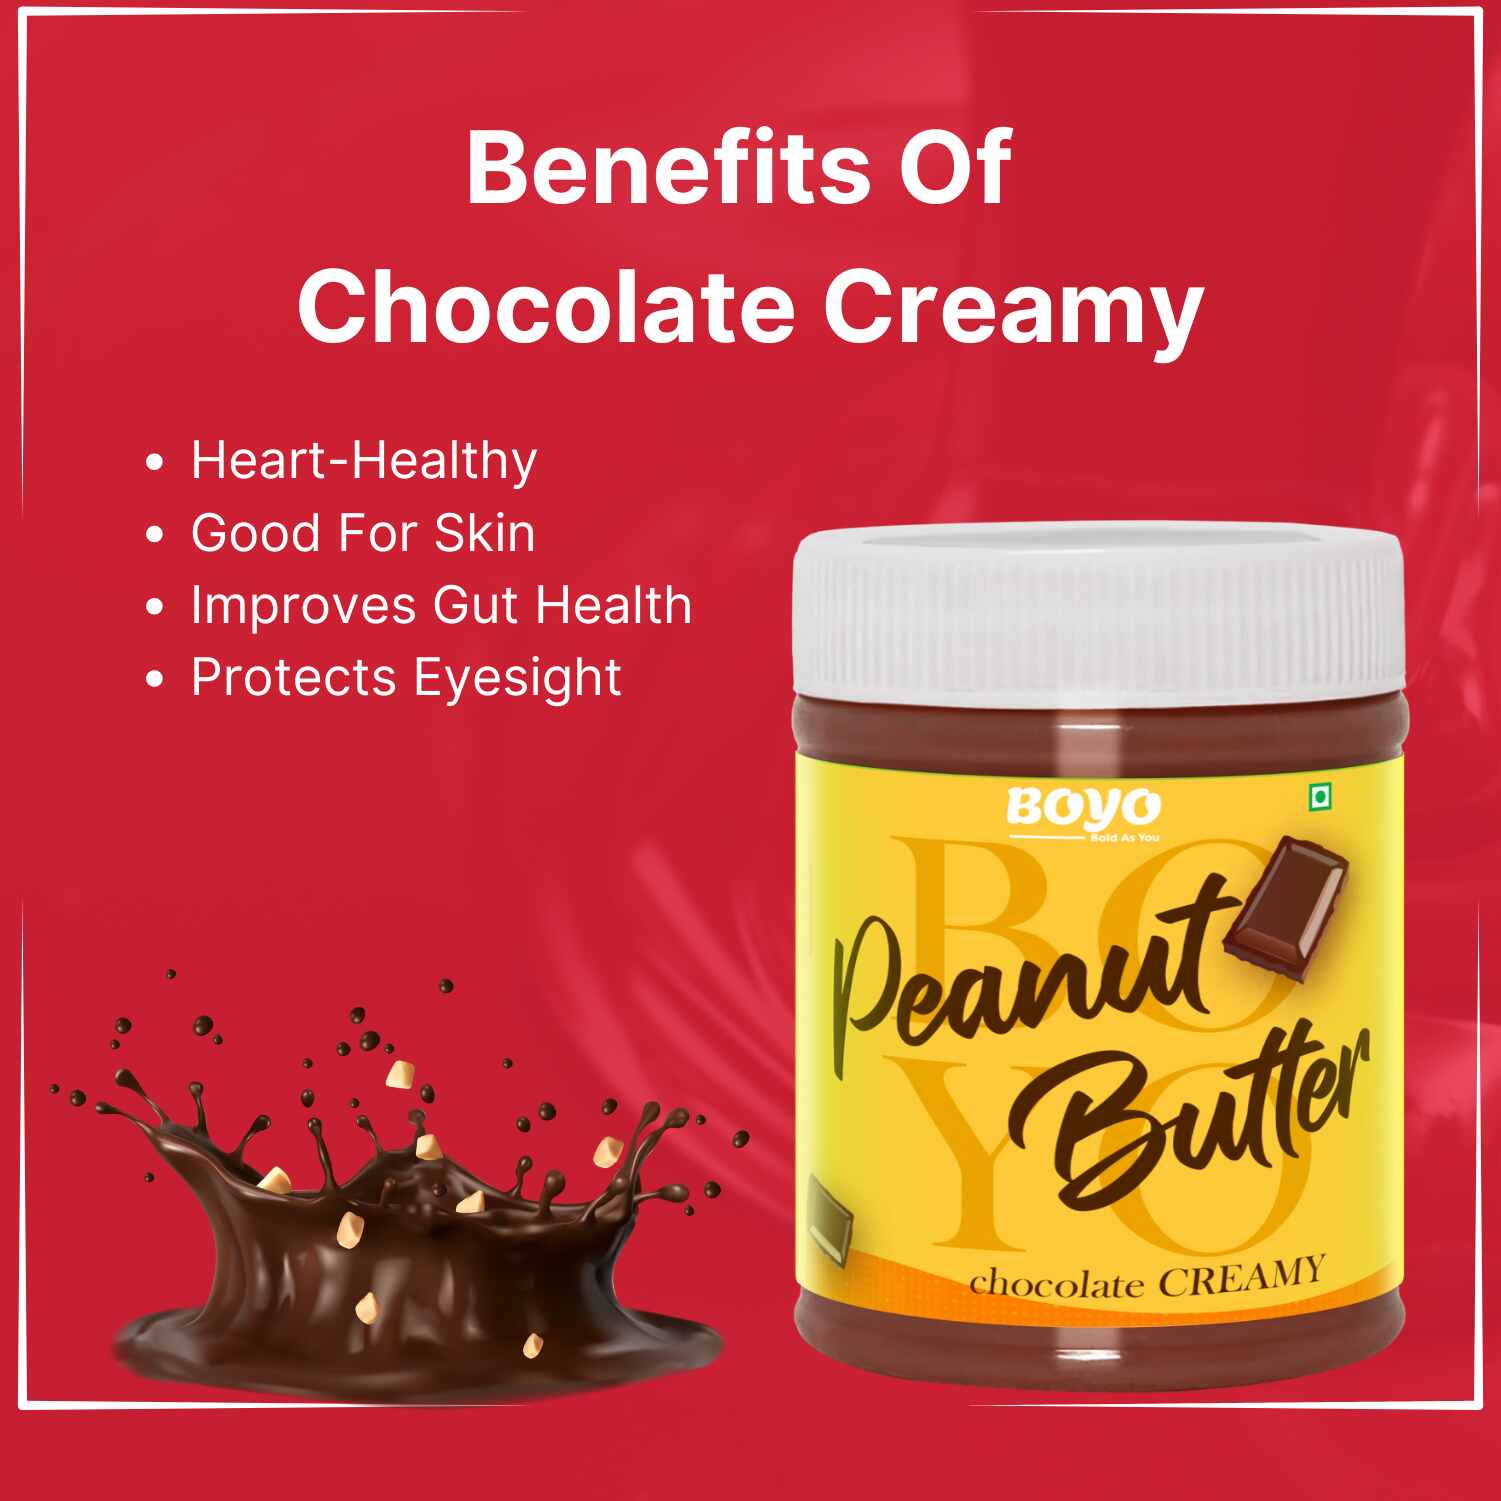 Peanut Butter Combo Chocolate Creamy and Crunchy 340g Each